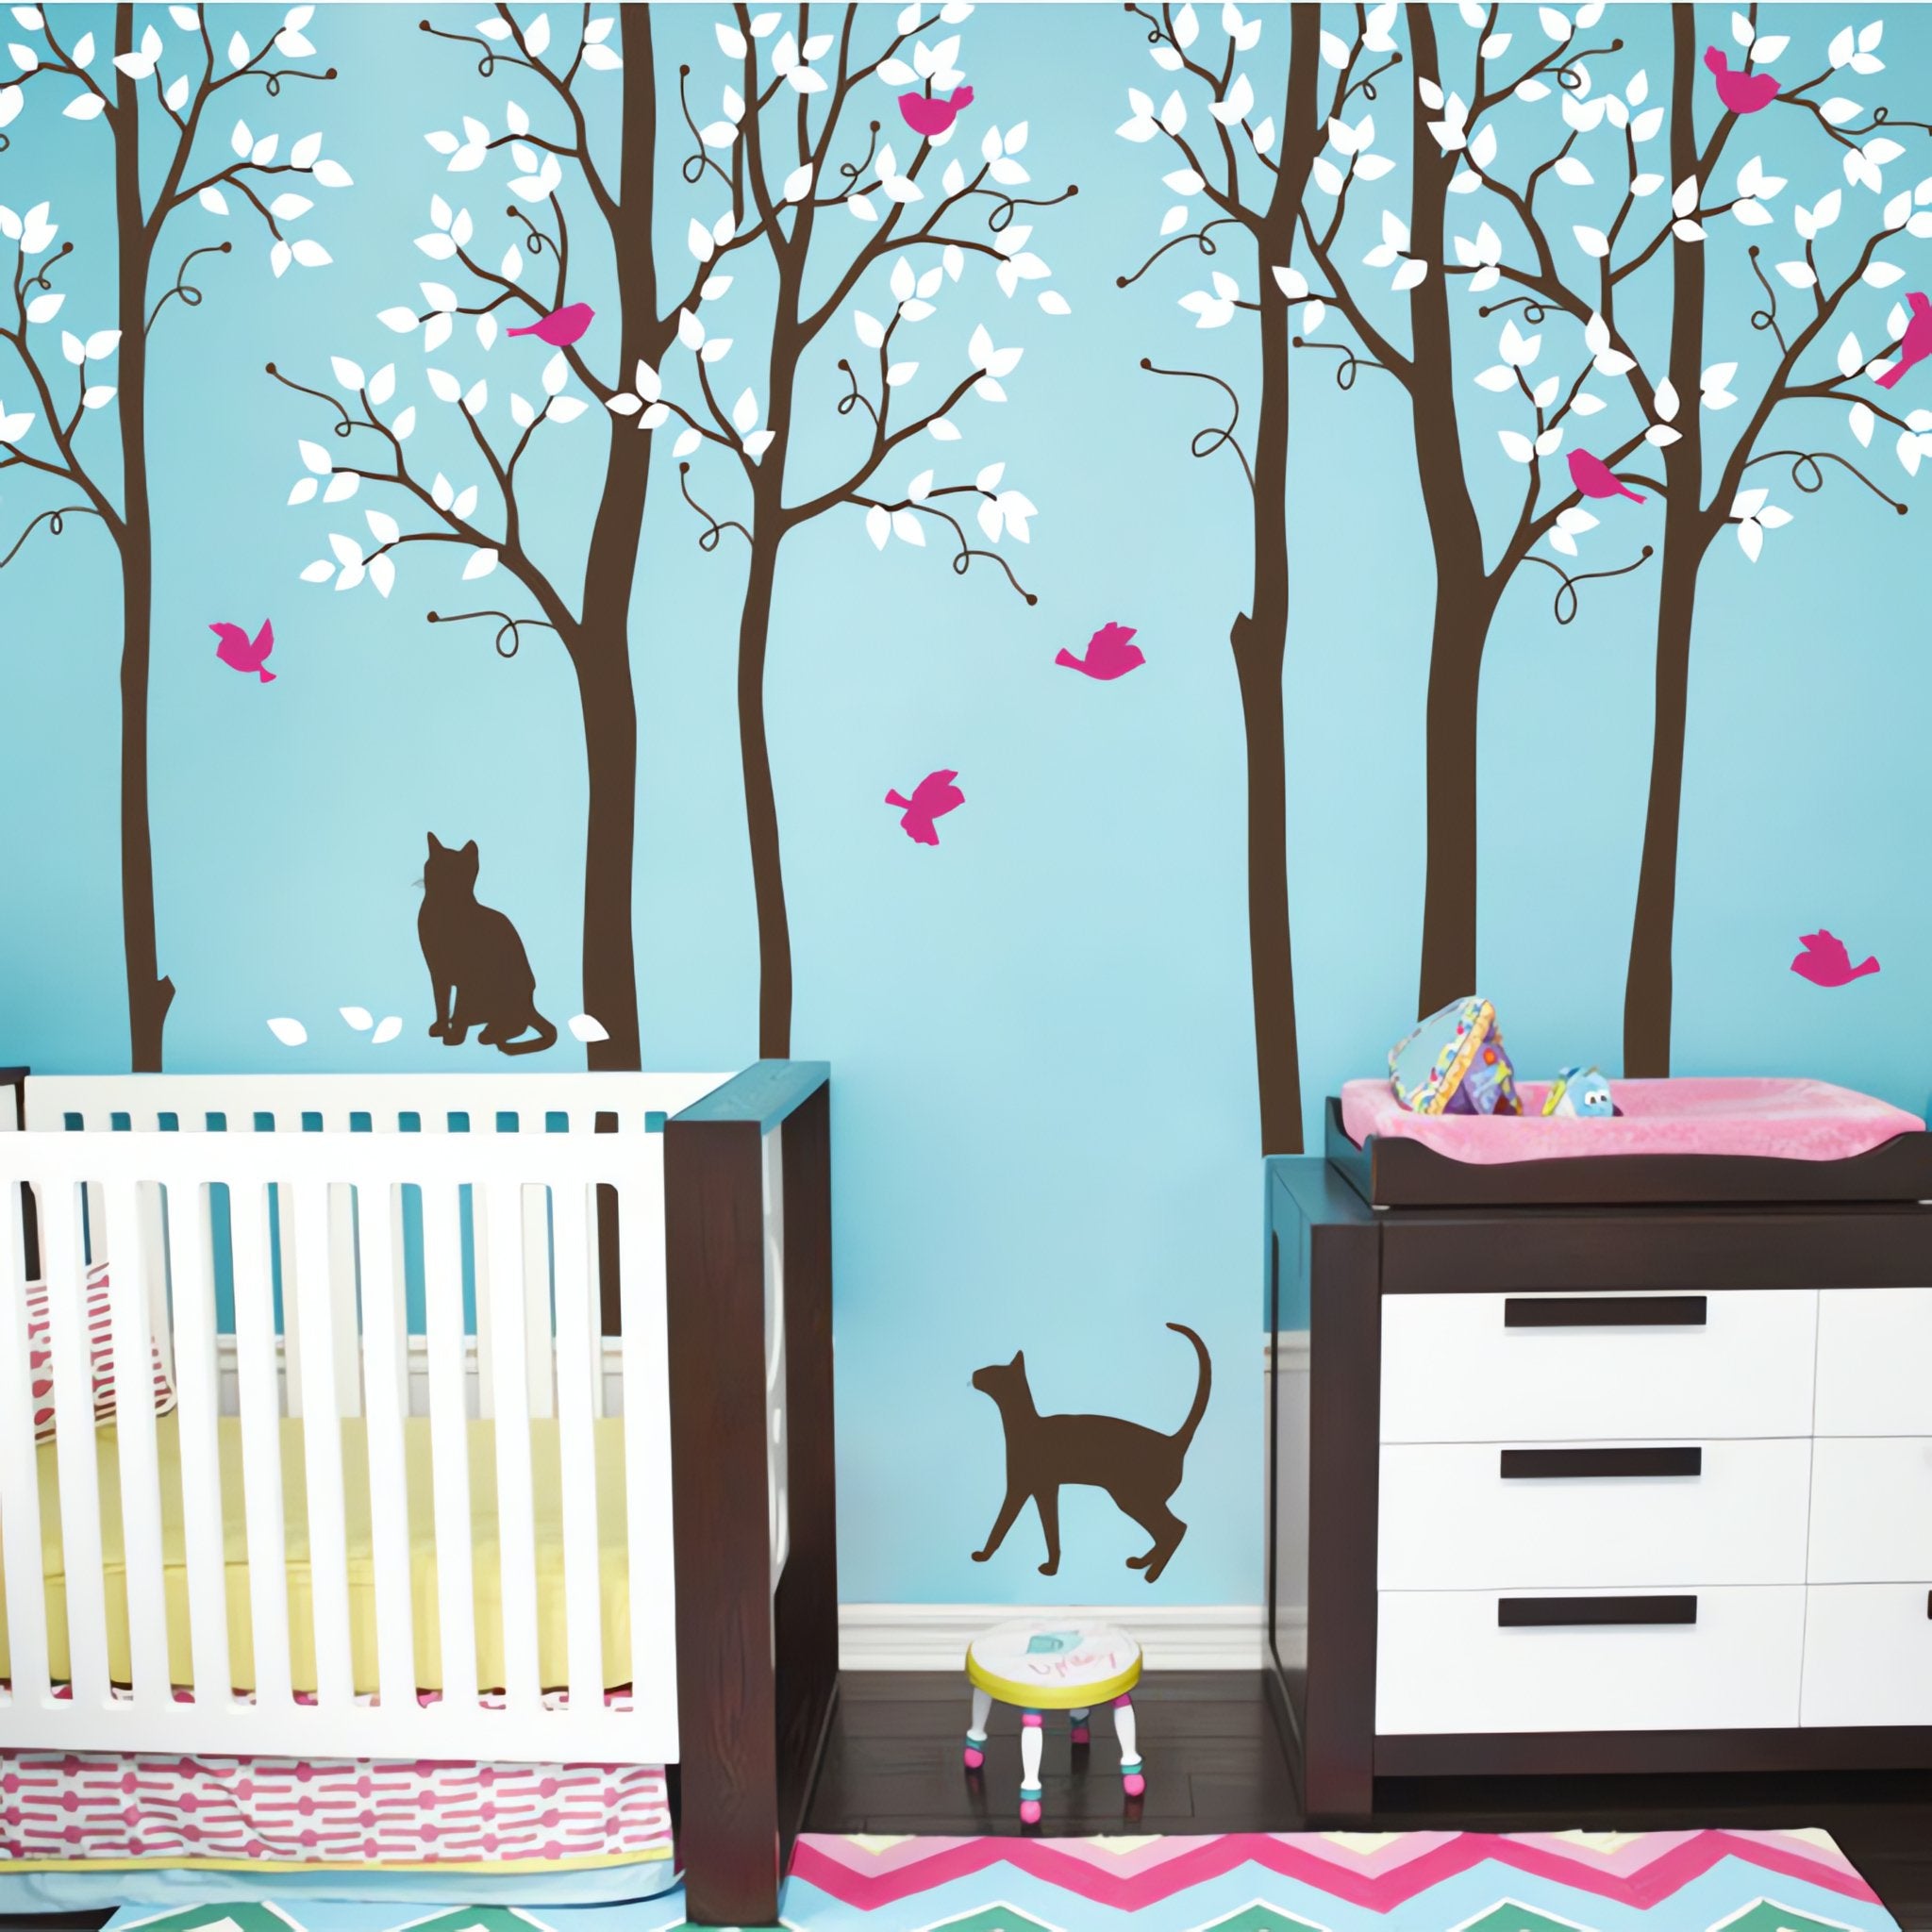 Tree wall sticker with 2 cats and some birds in a nursery with a crib and a dresser.